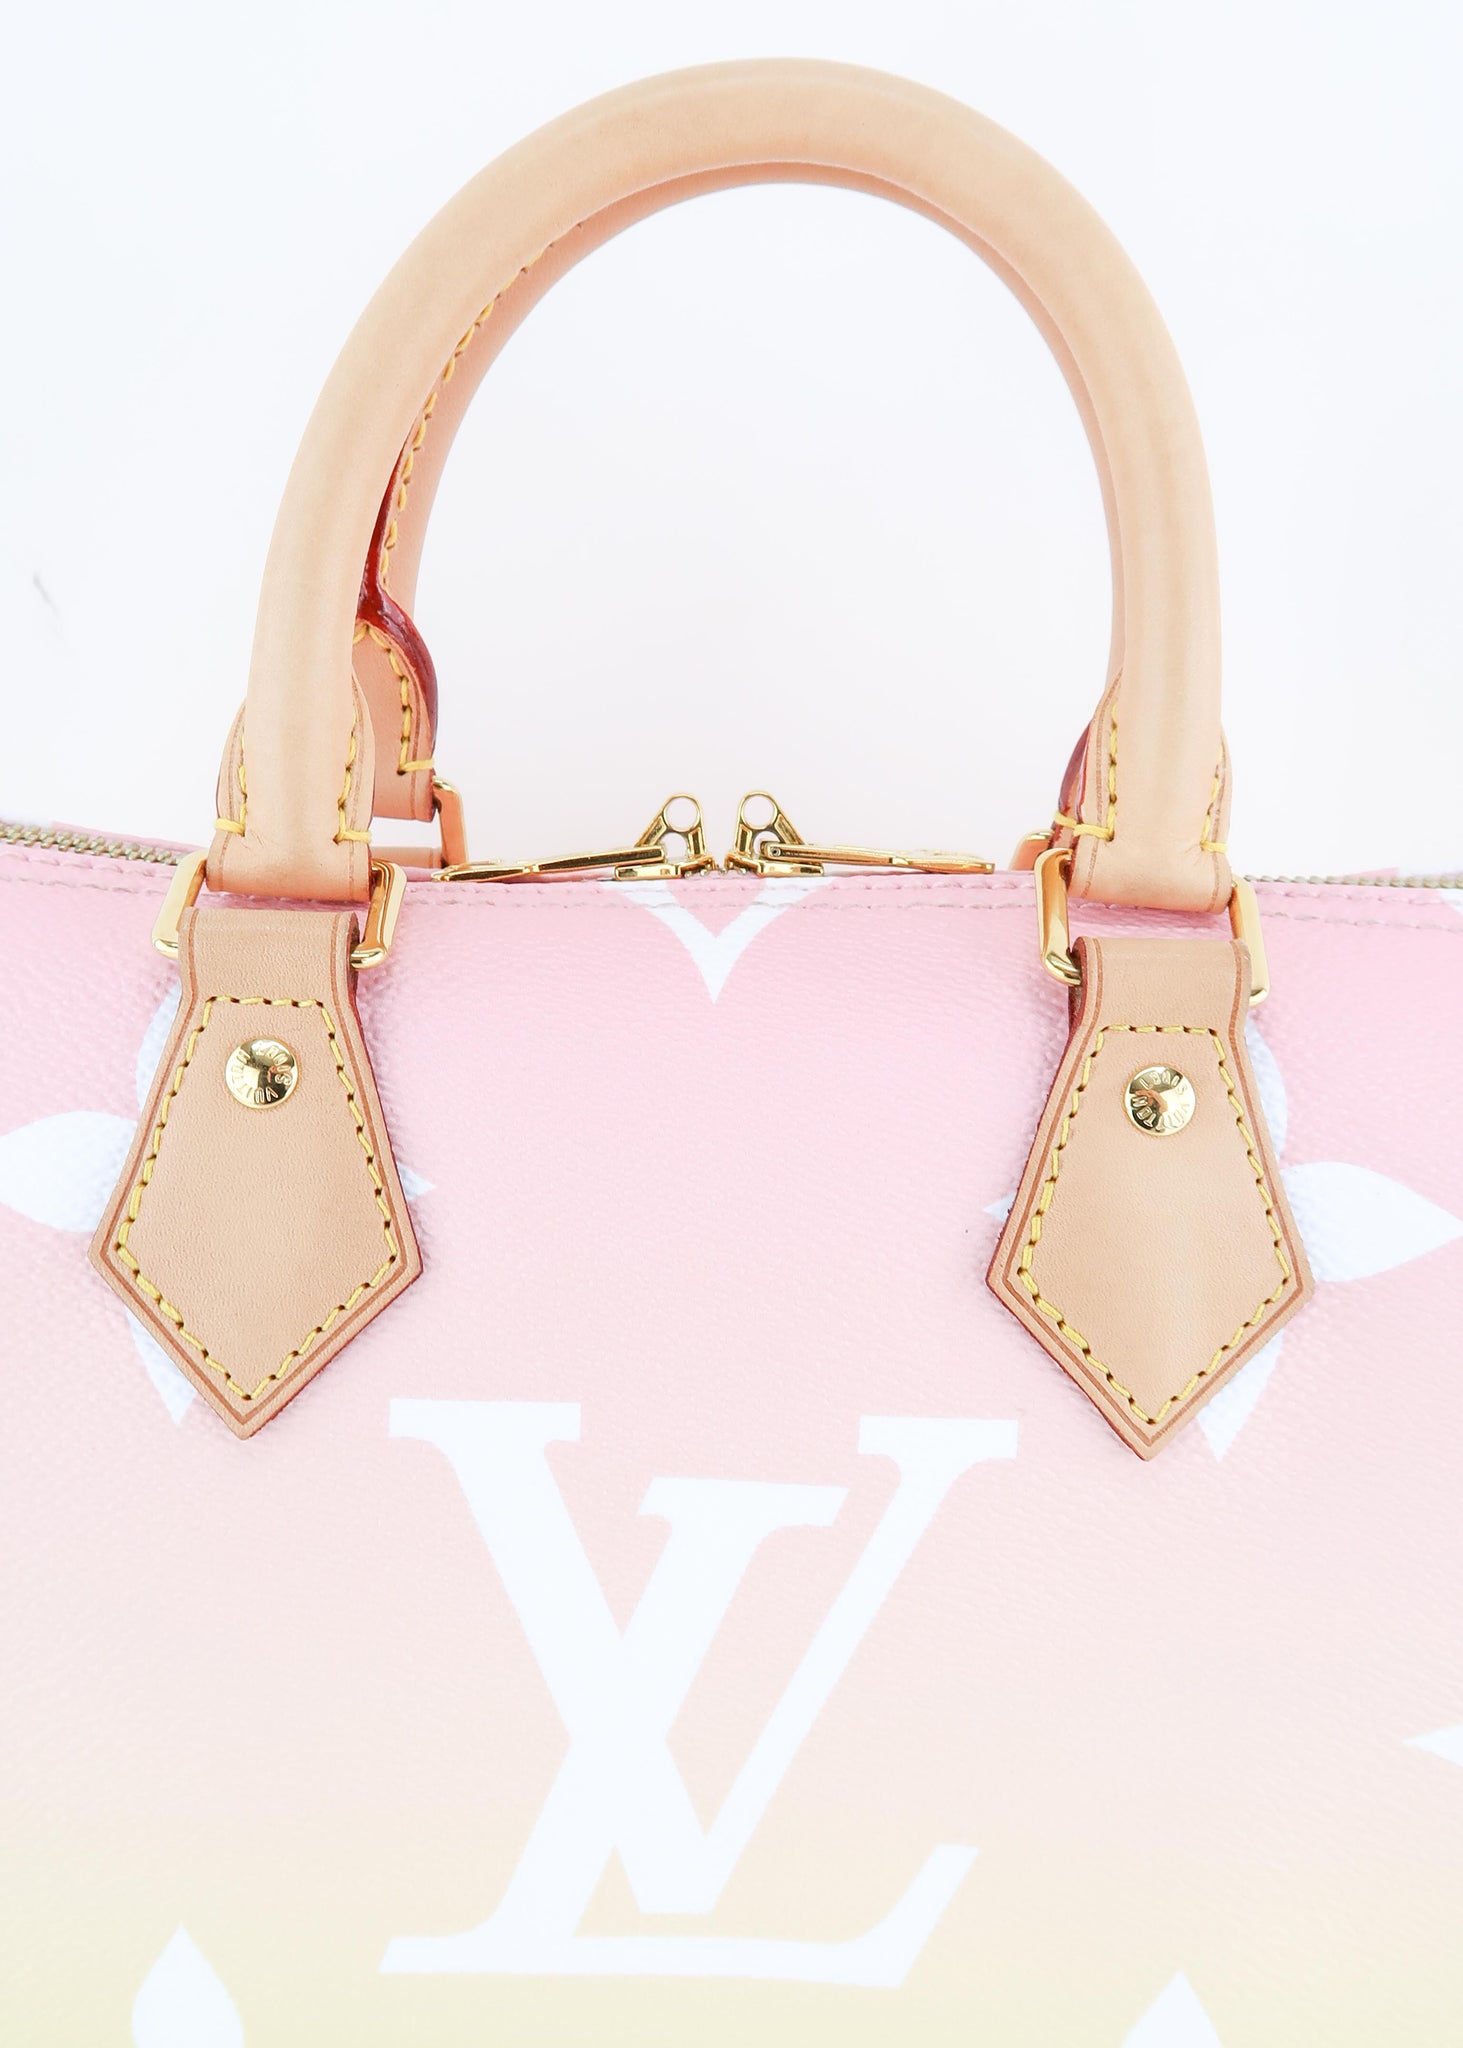 LOUIS VUITTON Monogram Giant By The Pool Speedy Bandouliere 25 Light Pink  1298942